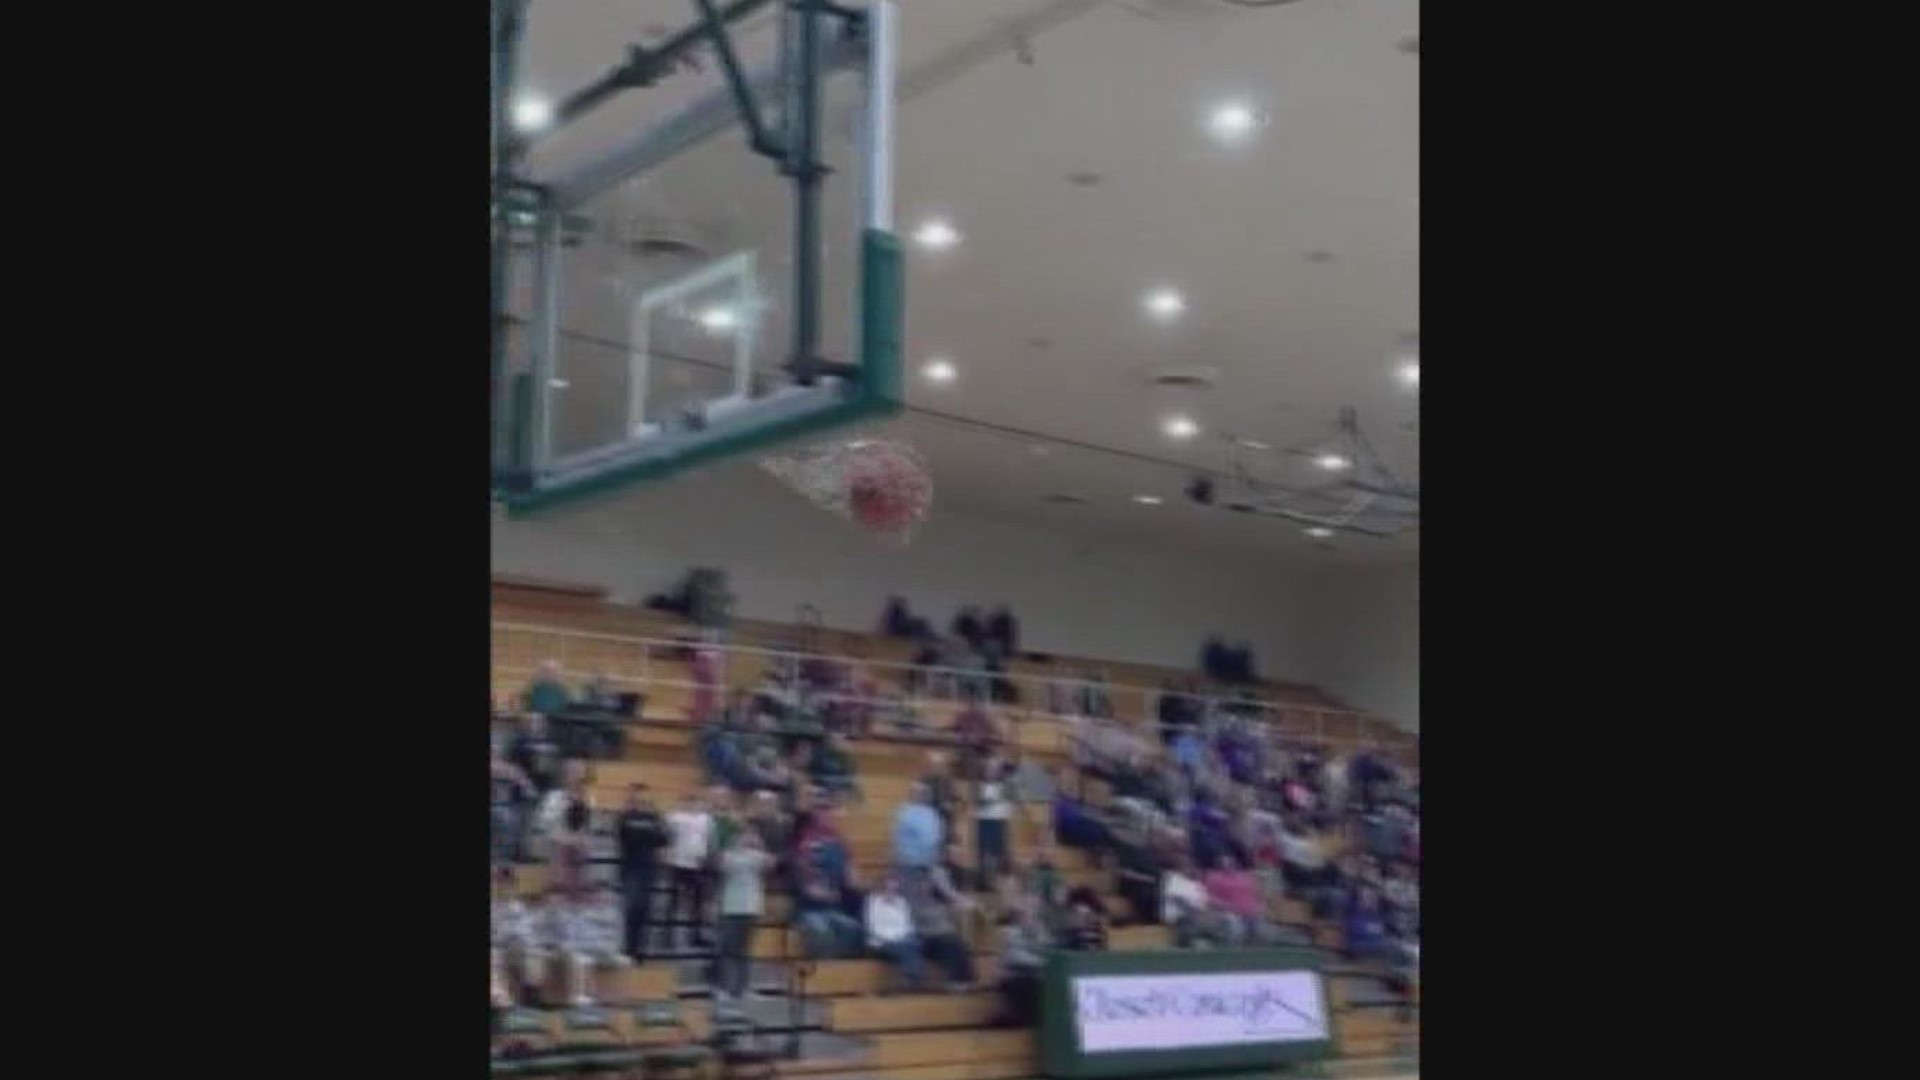 It happened during halftime of a basketball game at Pendleton Heights High School.